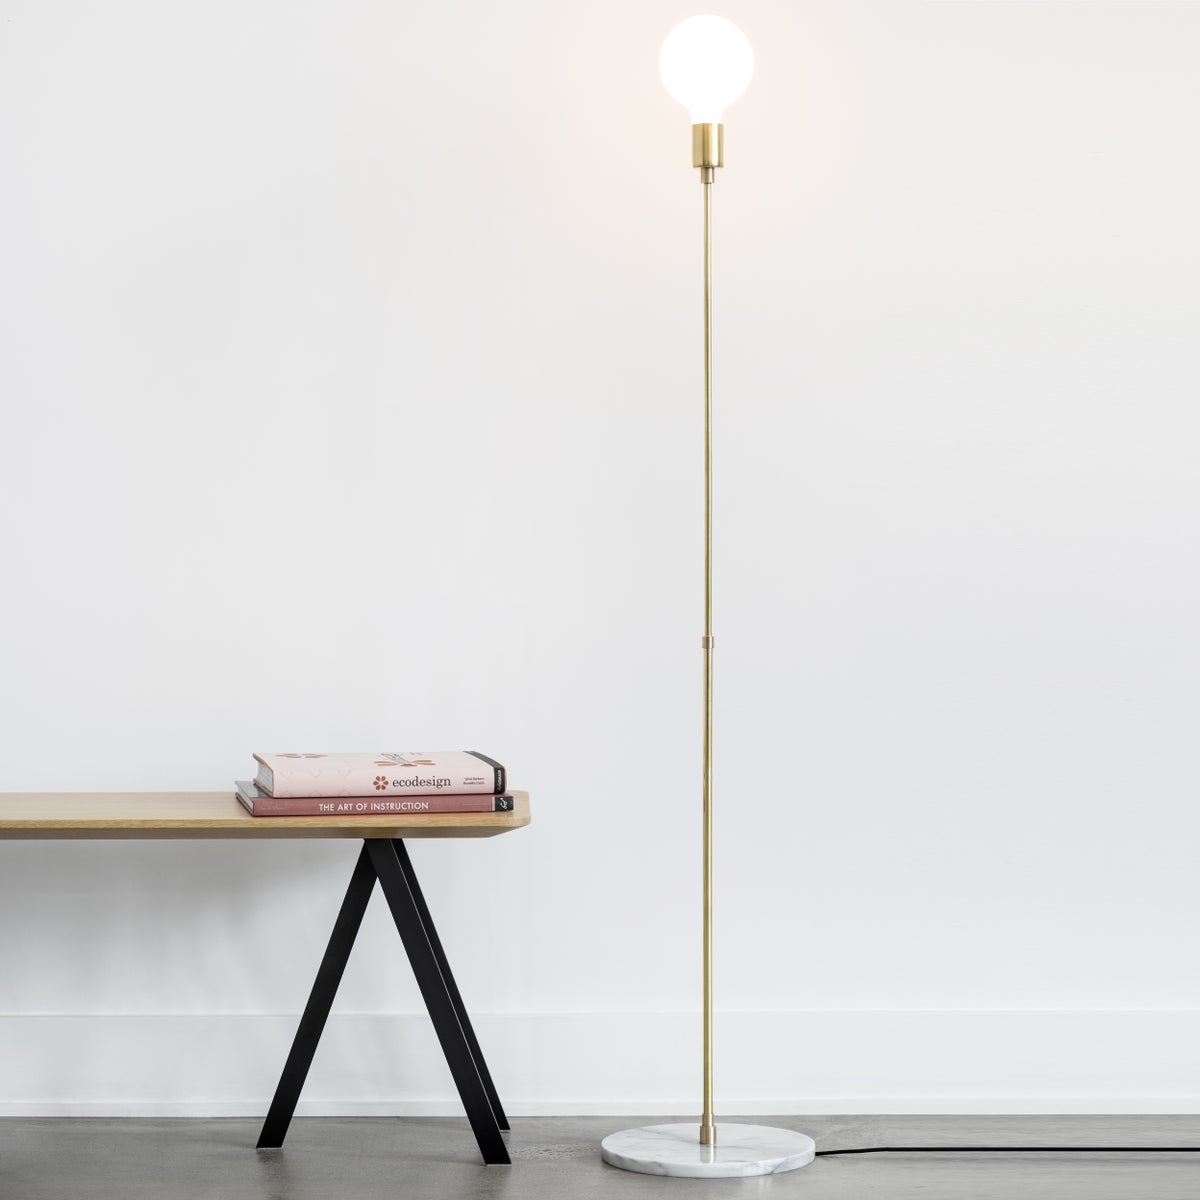 Tall golden lamp pole with lit bulb on top next to a wooden bench